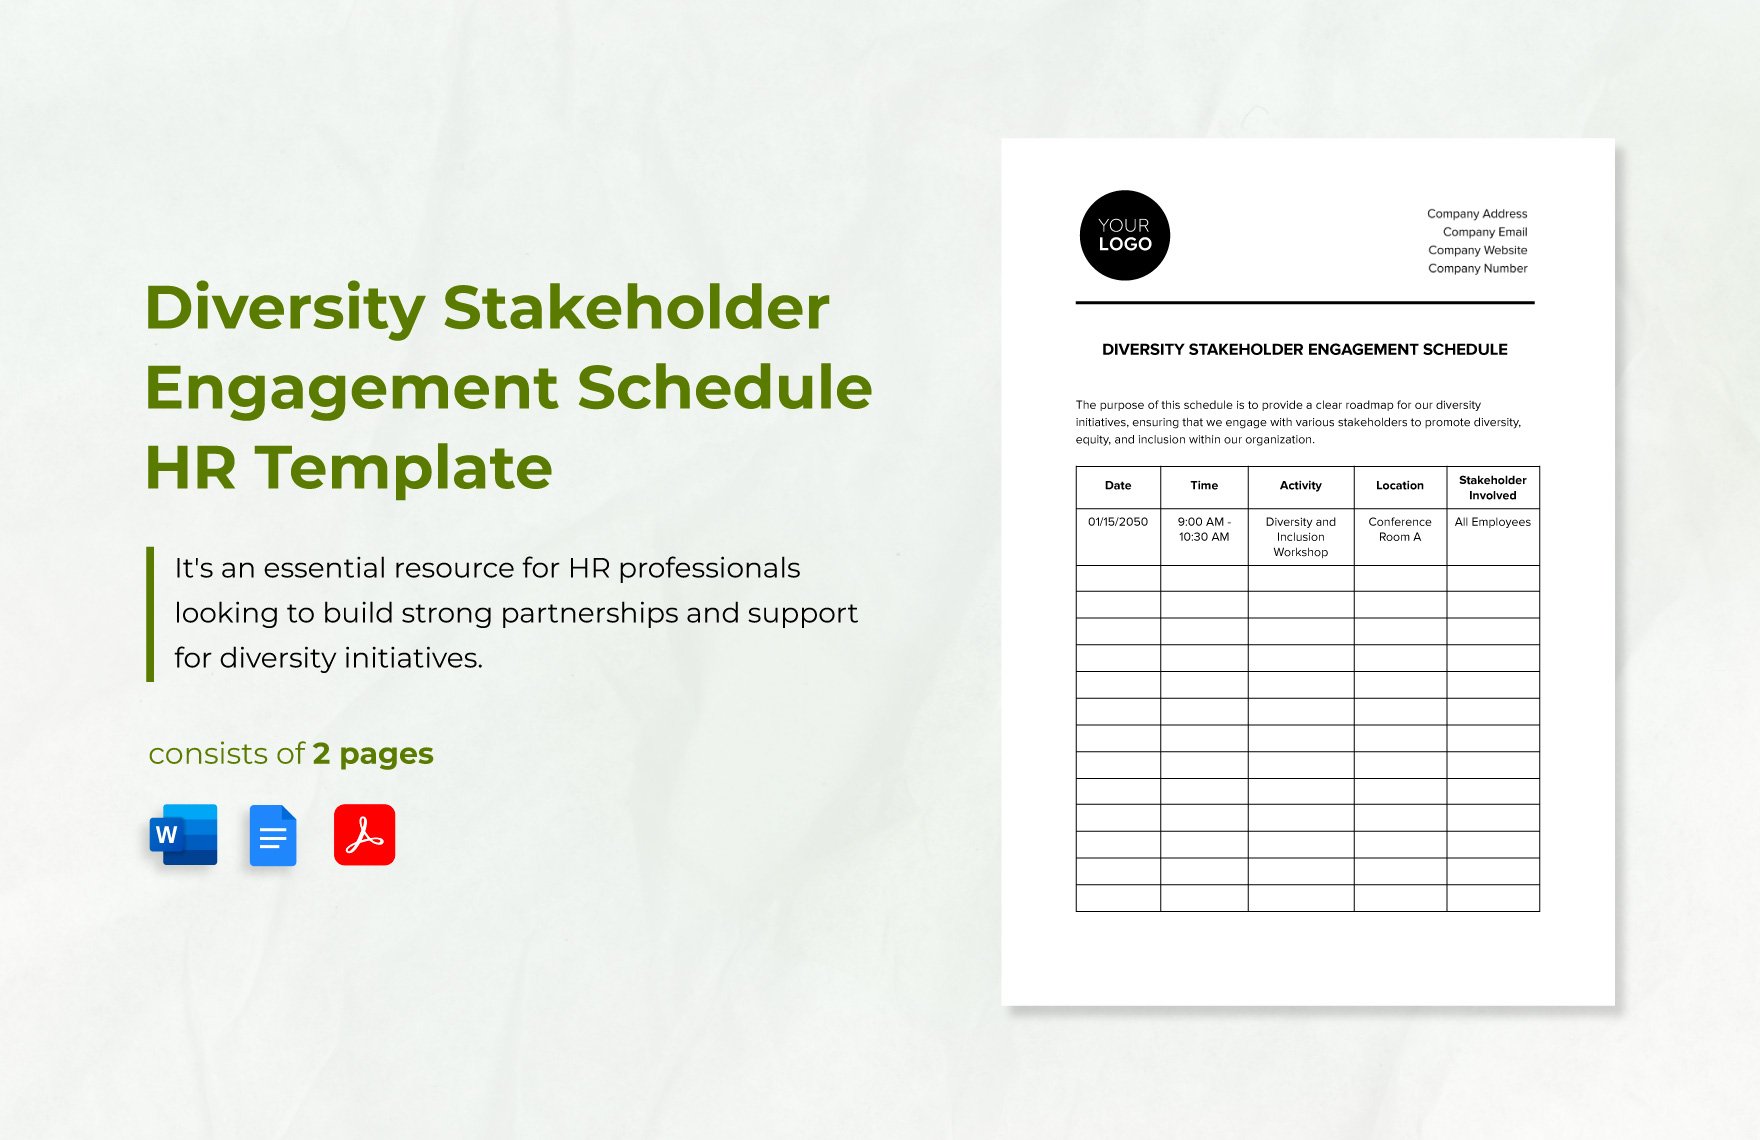 Diversity Stakeholder Engagement Schedule HR Template in Word, Google Docs, PDF